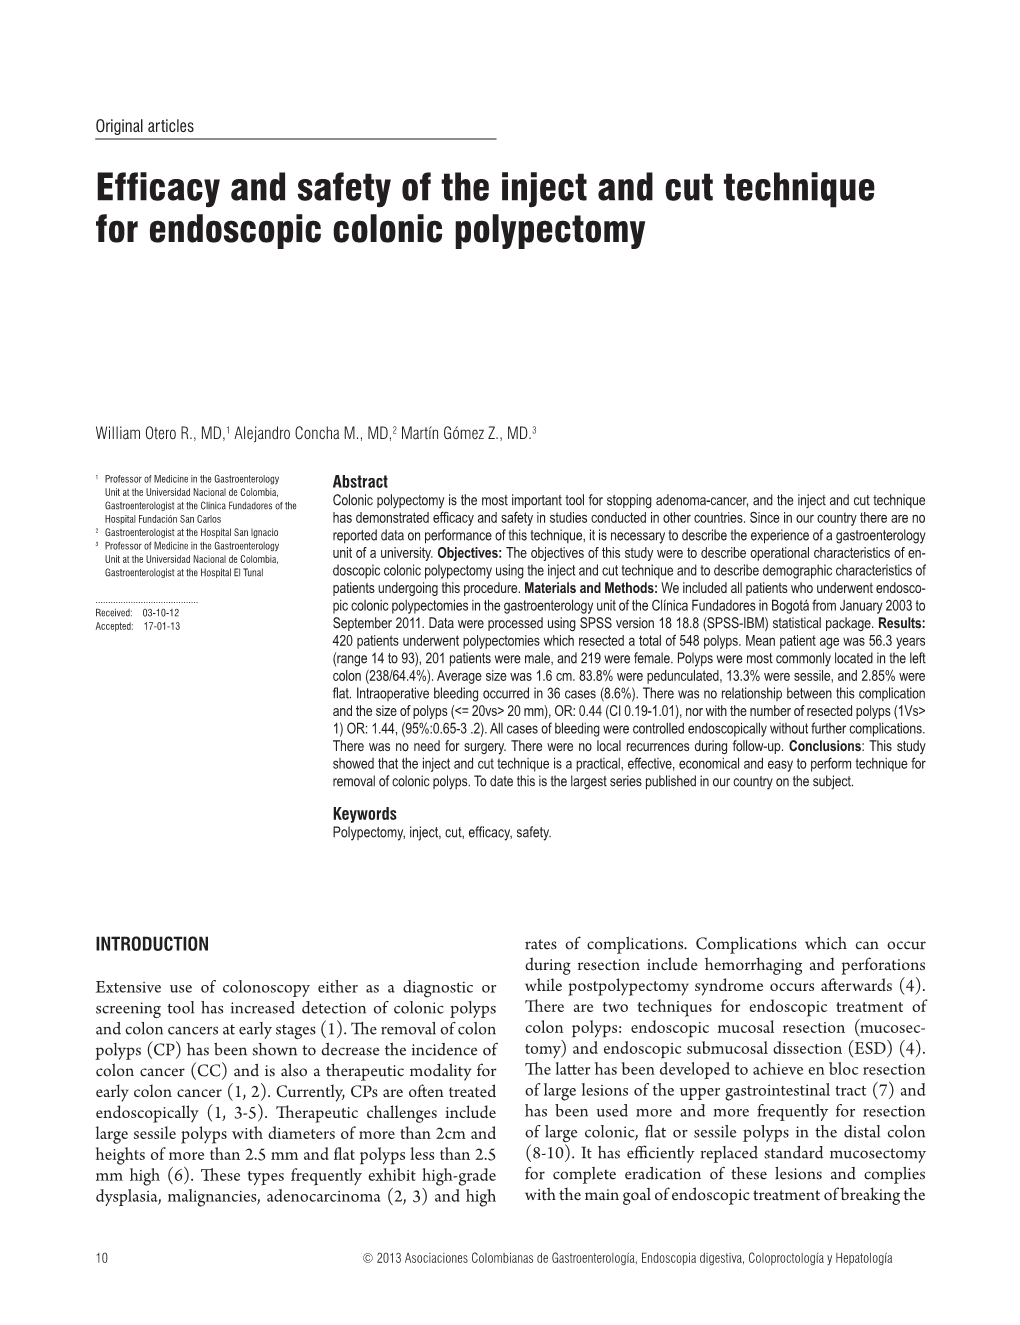 Efficacy and Safety of the Inject and Cut Technique for Endoscopic Colonic Polypectomy